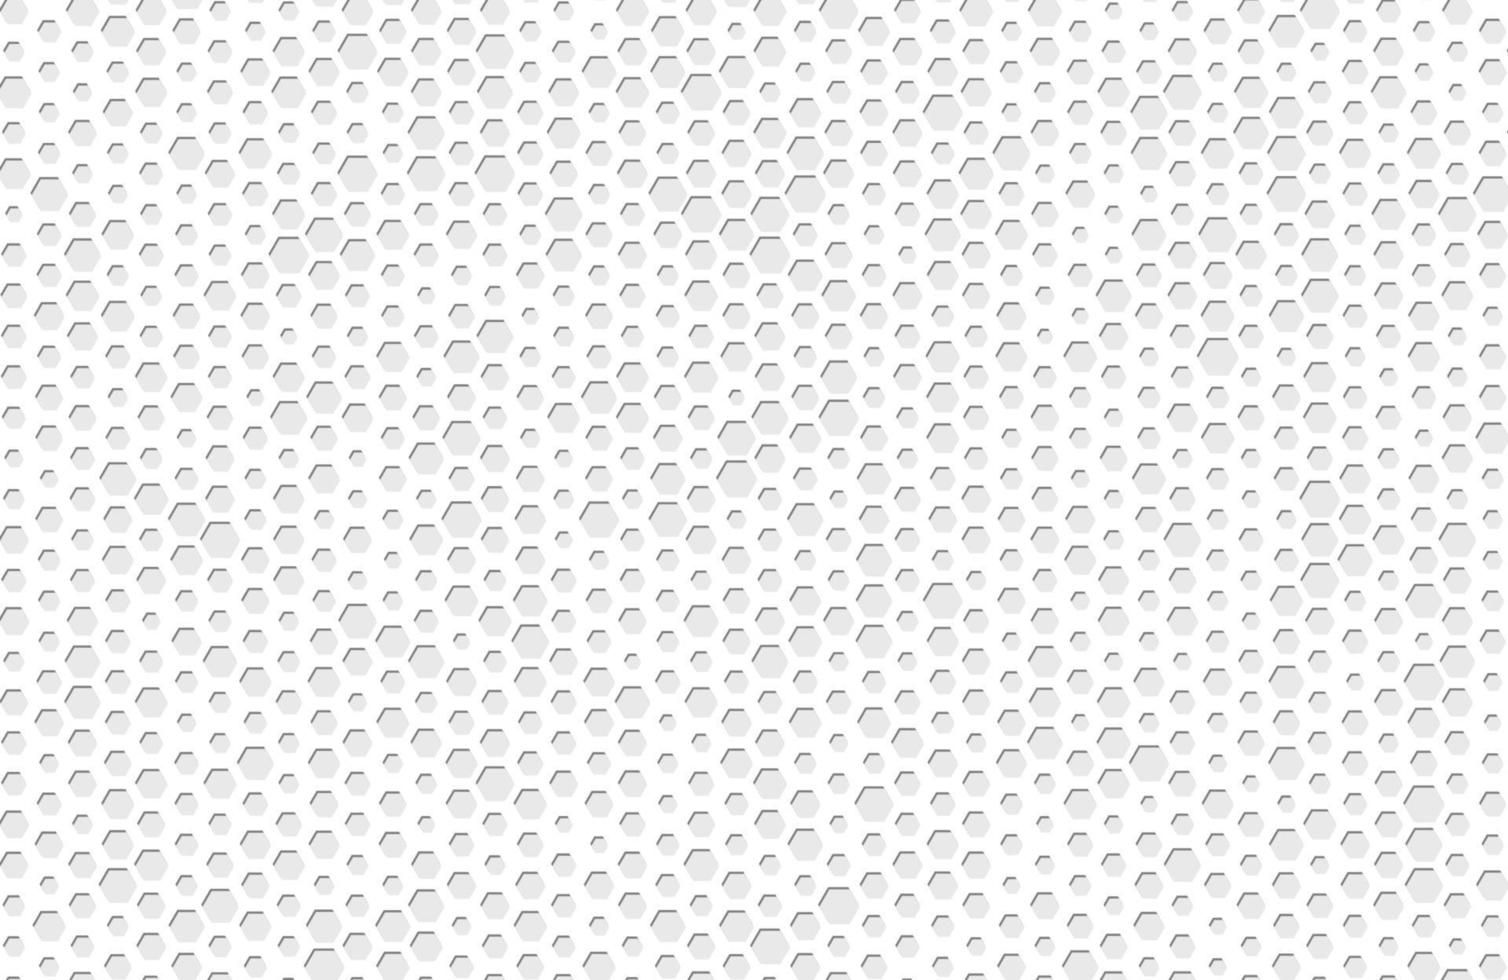 Abstract white background textured with circle halftone element vector